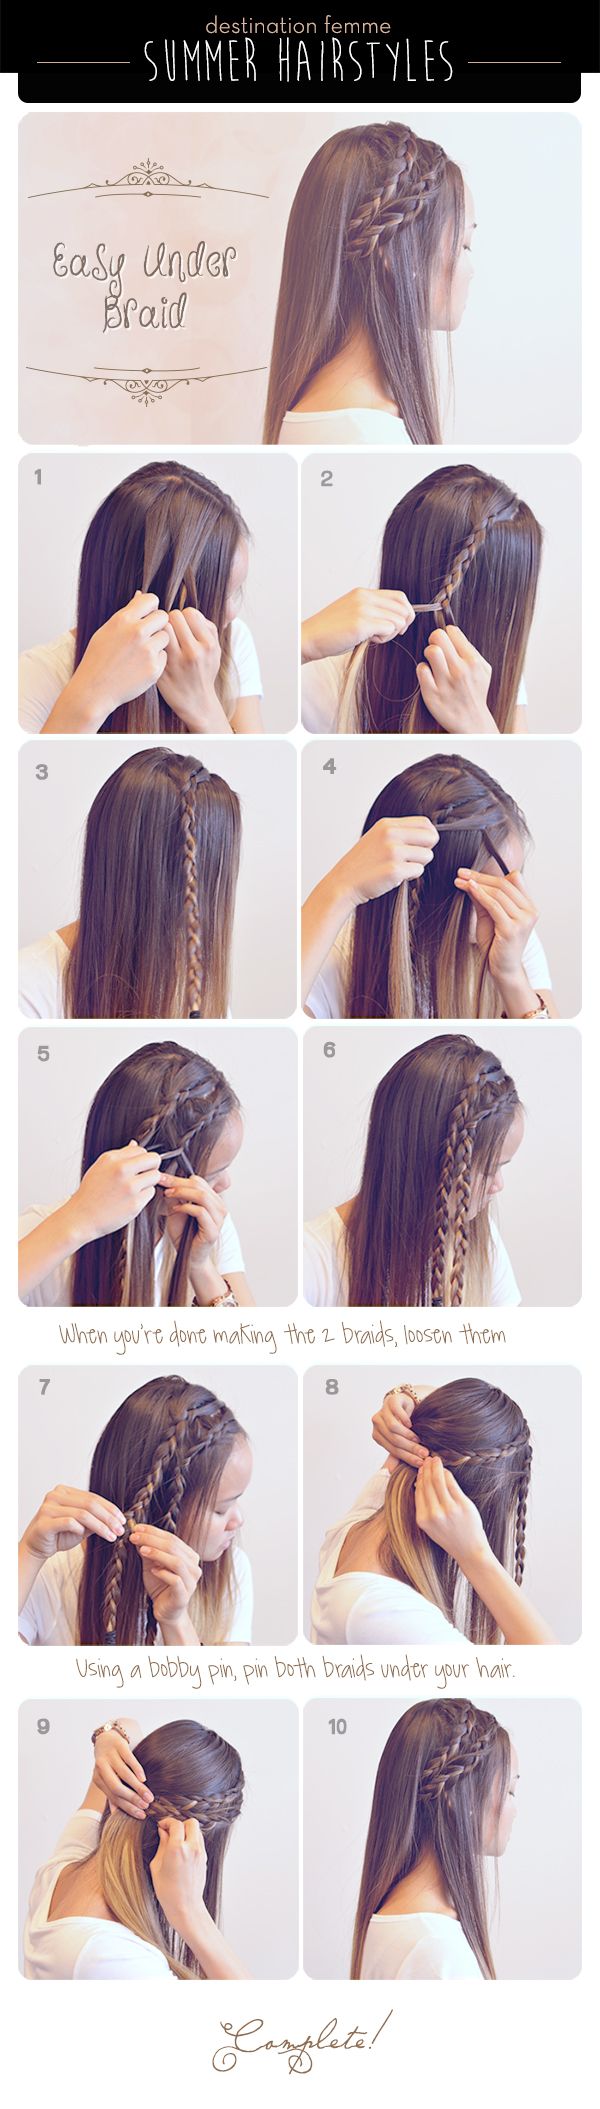 easy-hairstyles-for-straight-hair-at-home-85_10 Easy hairstyles for straight hair at home